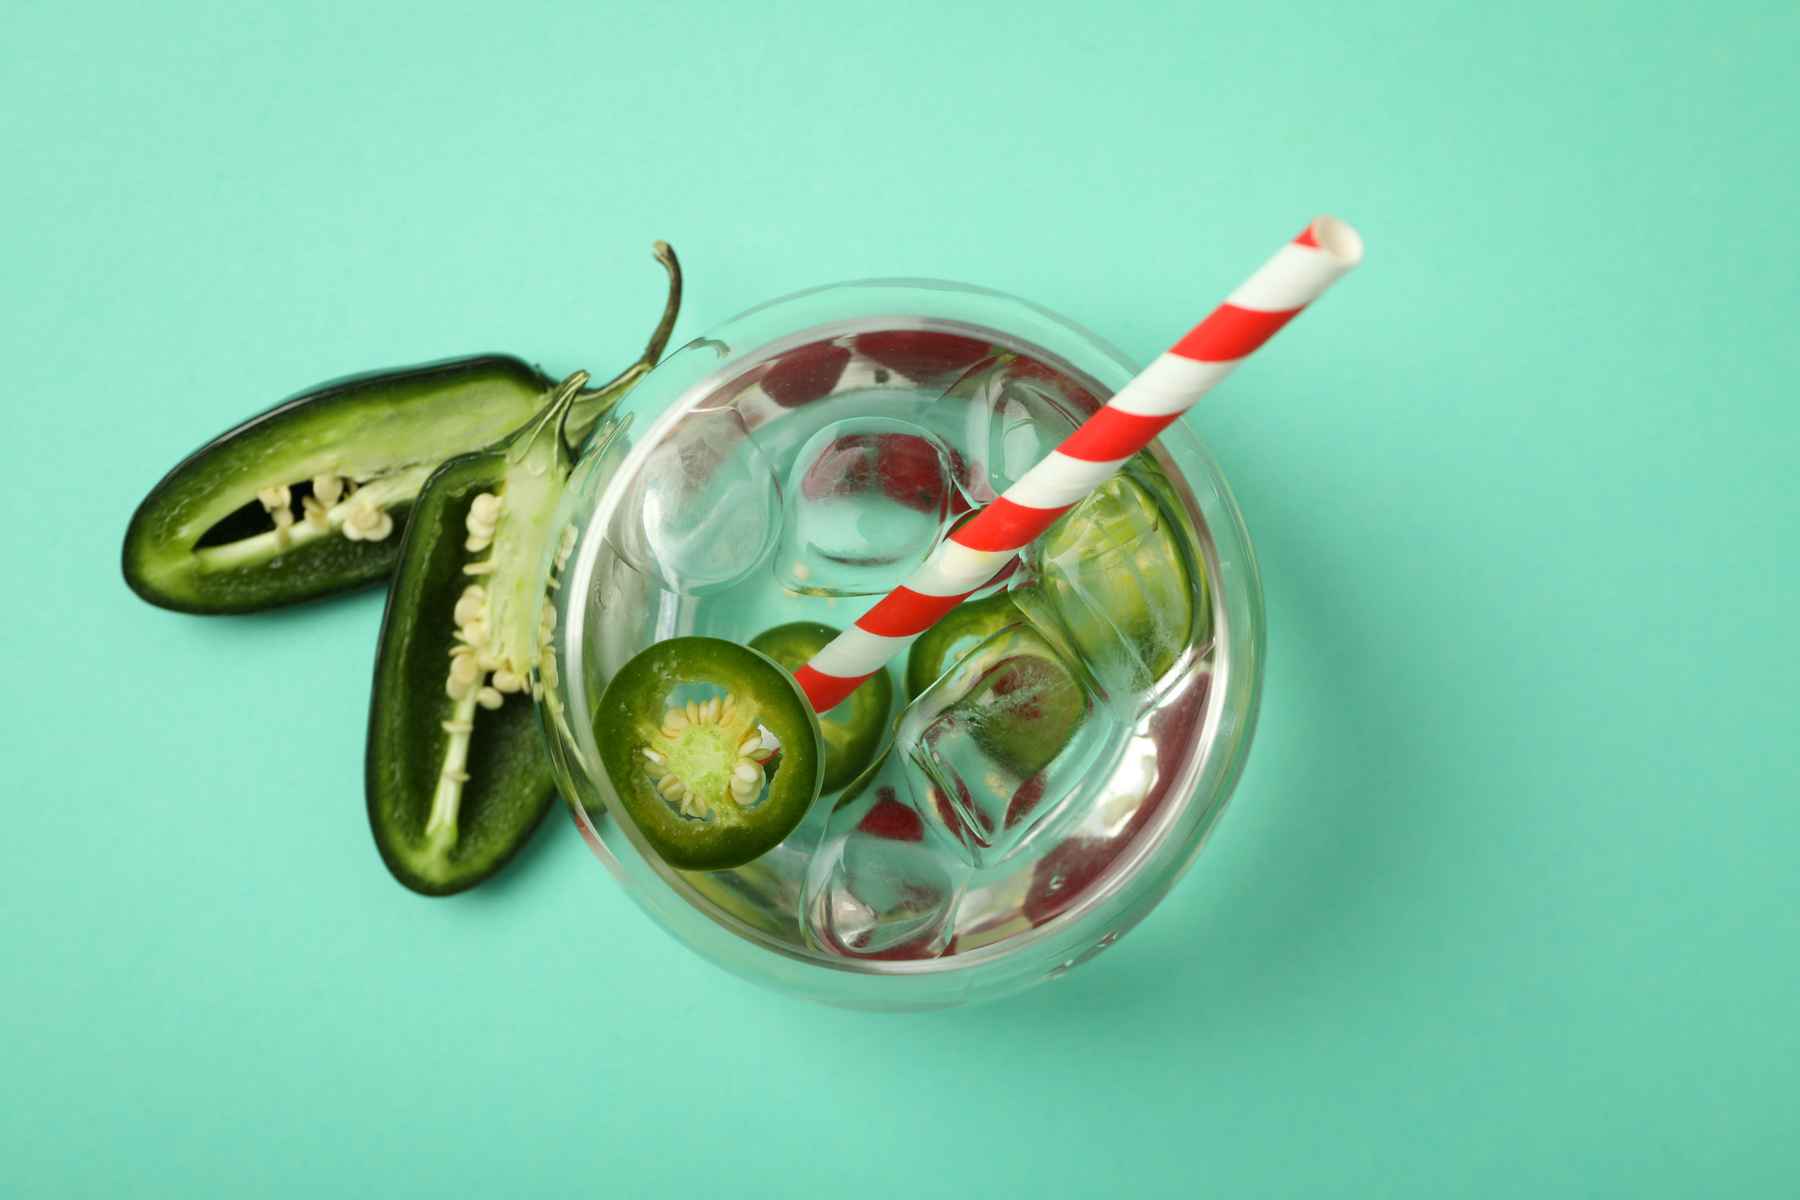 Overhead view of beverage garnished with halved jalapeno chiles with a red and white straw on teal background.